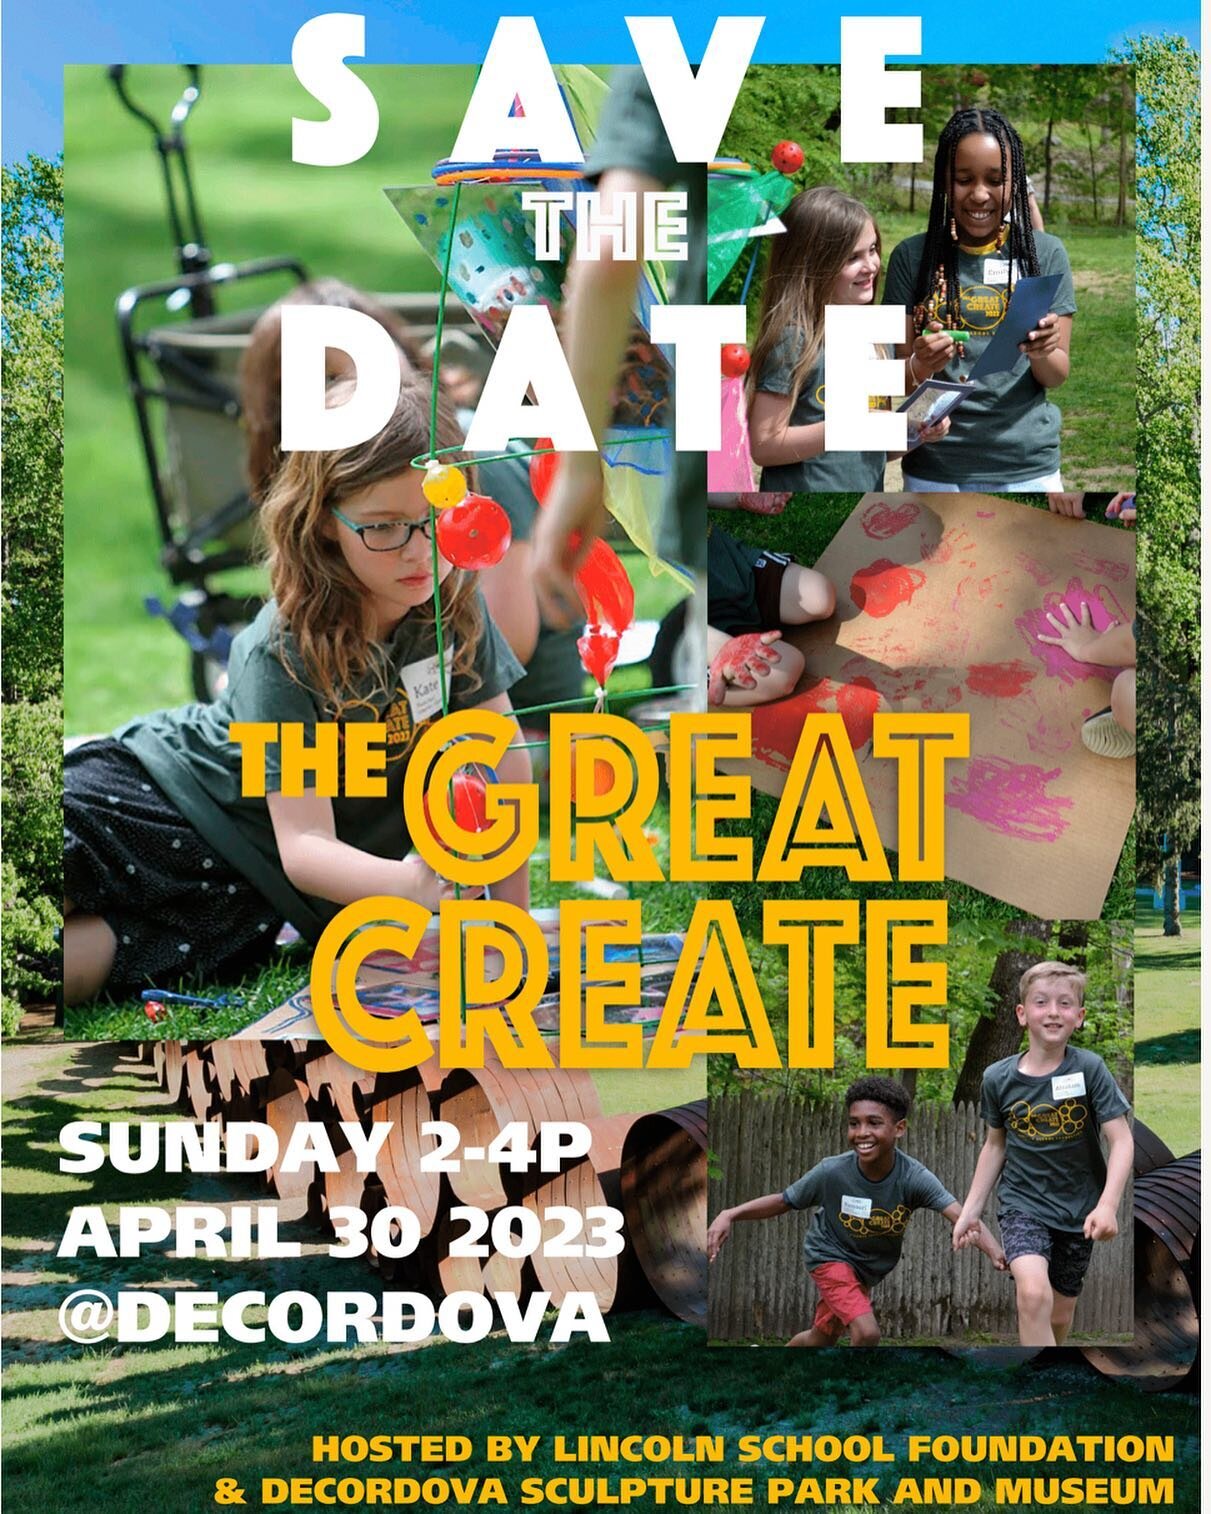 Save the Date for The Great Create!

On April 30, the Lincoln School Foundation will invite K-5 students to complete creative challenges at deCordova Sculpture Park and Museum. Students from the Lincoln and Hanscom campuses will work collaboratively 